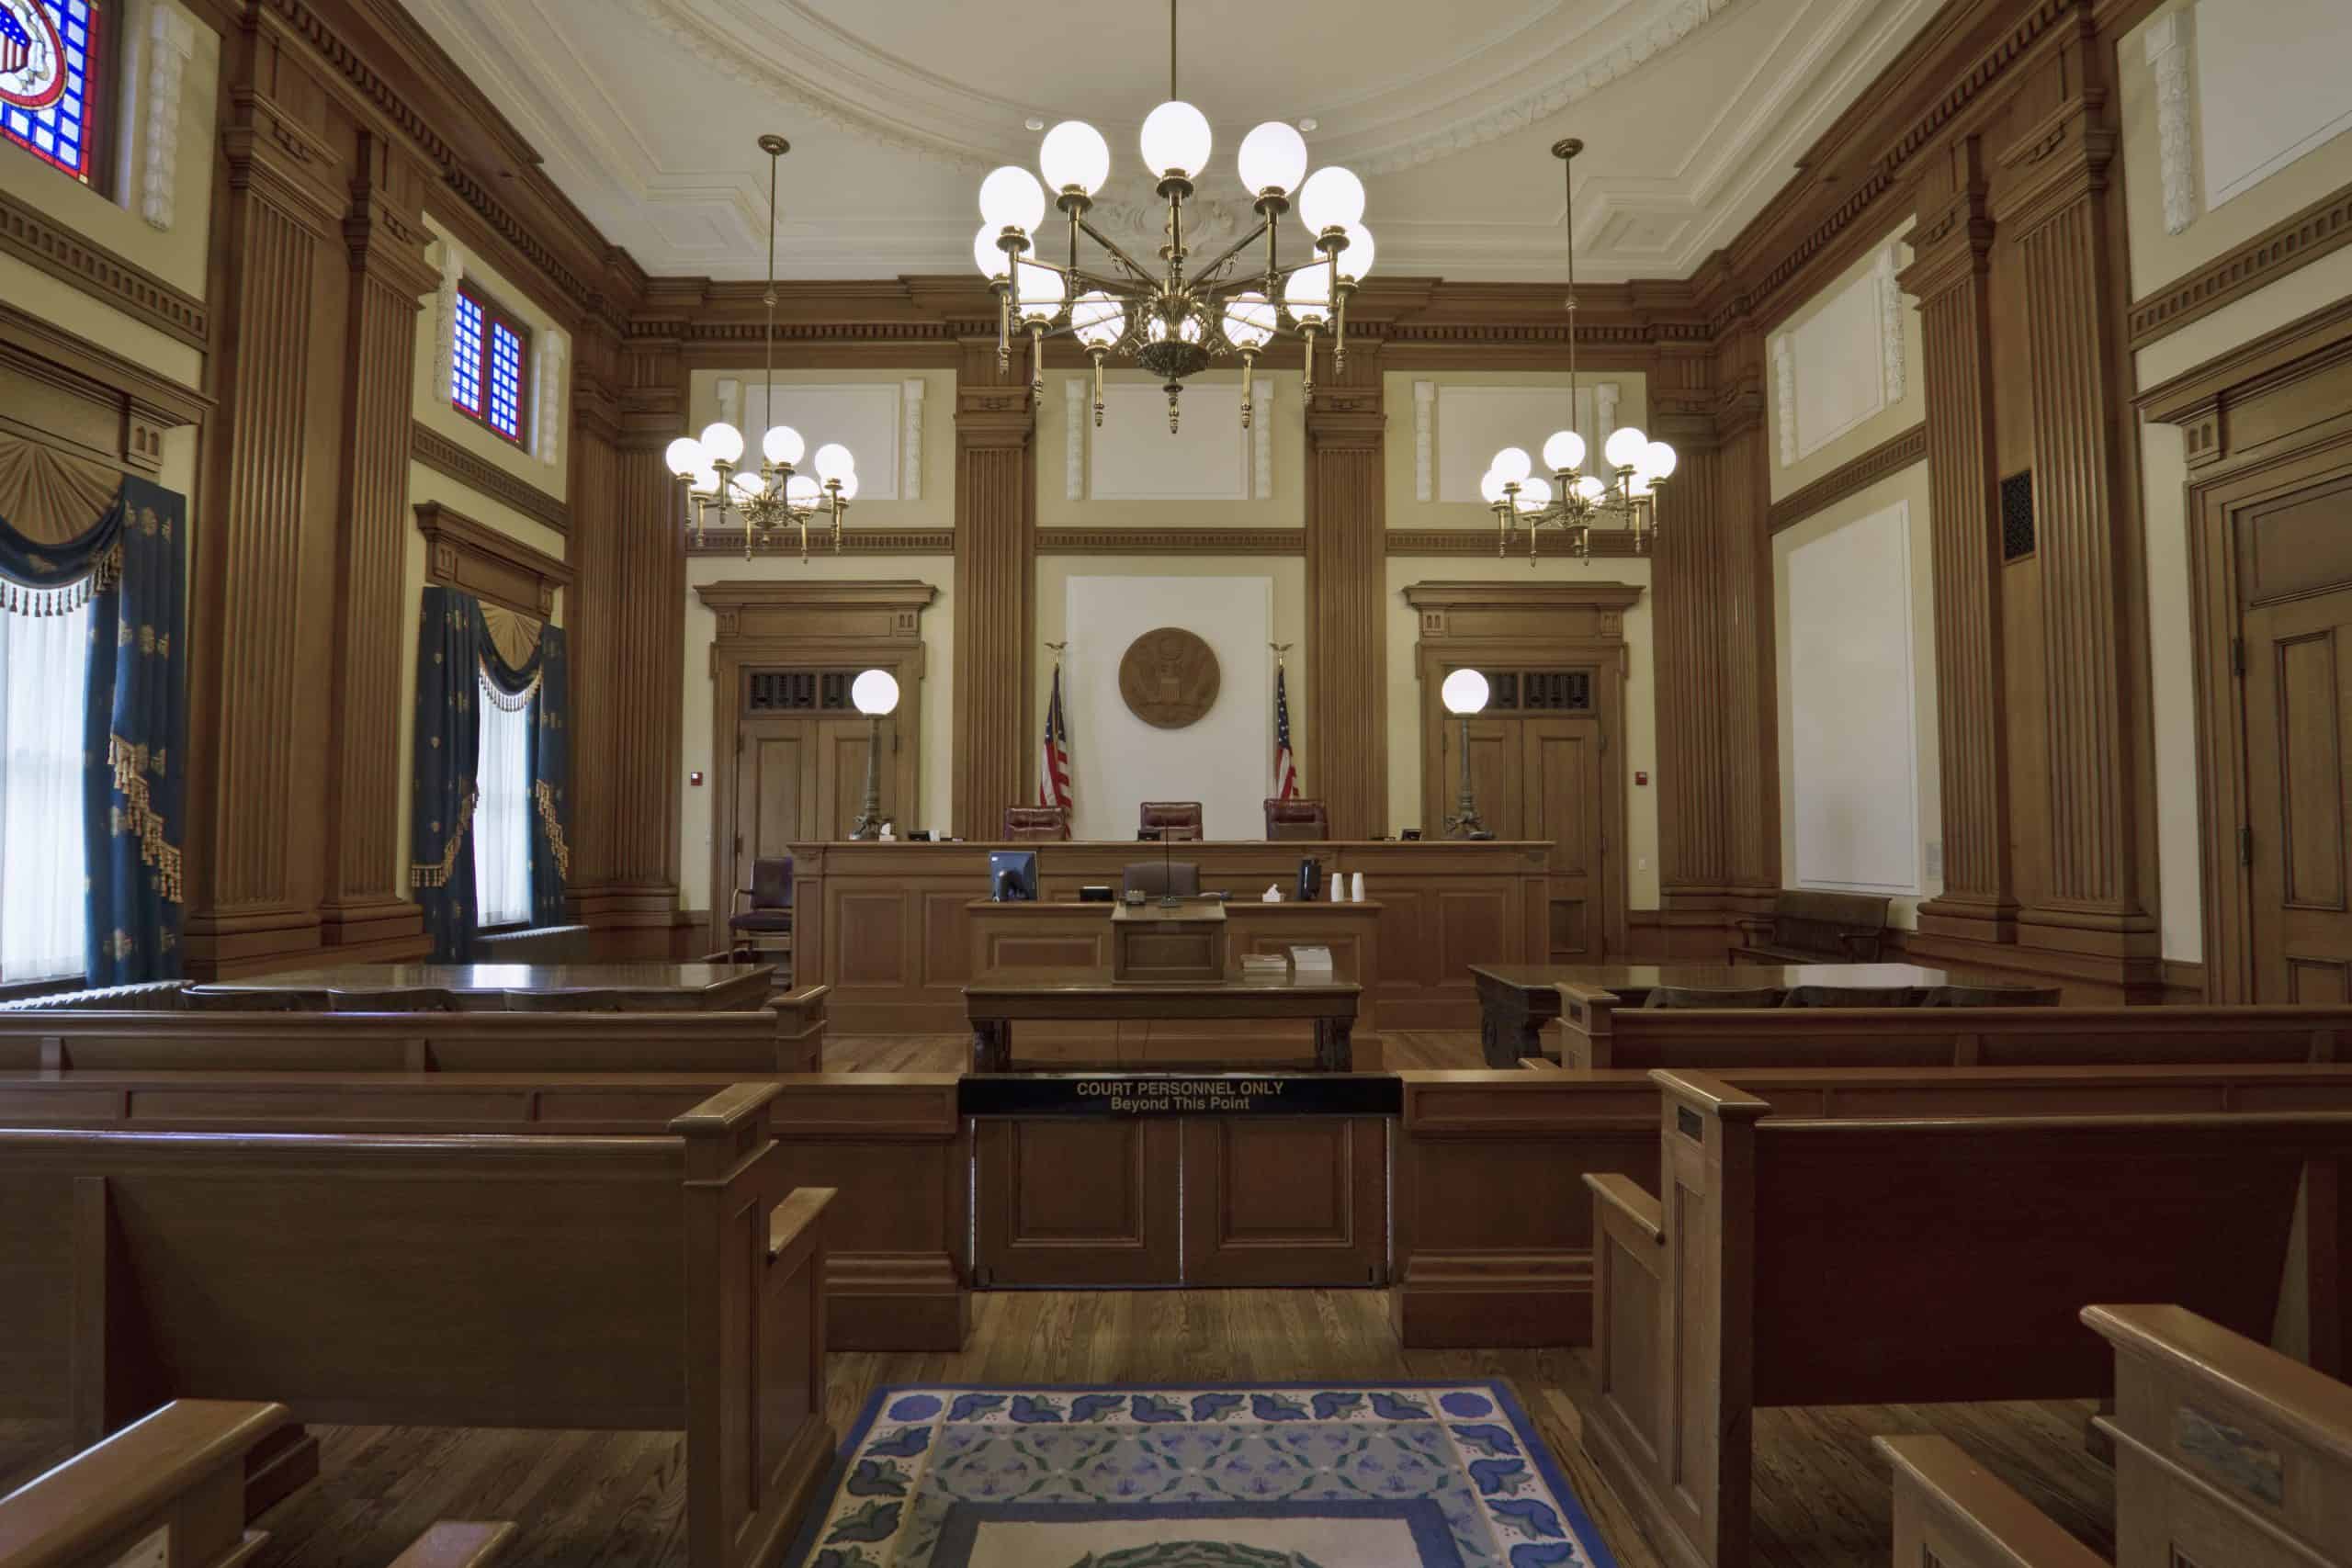 Found yourself in a courtroom over your drug abuse?